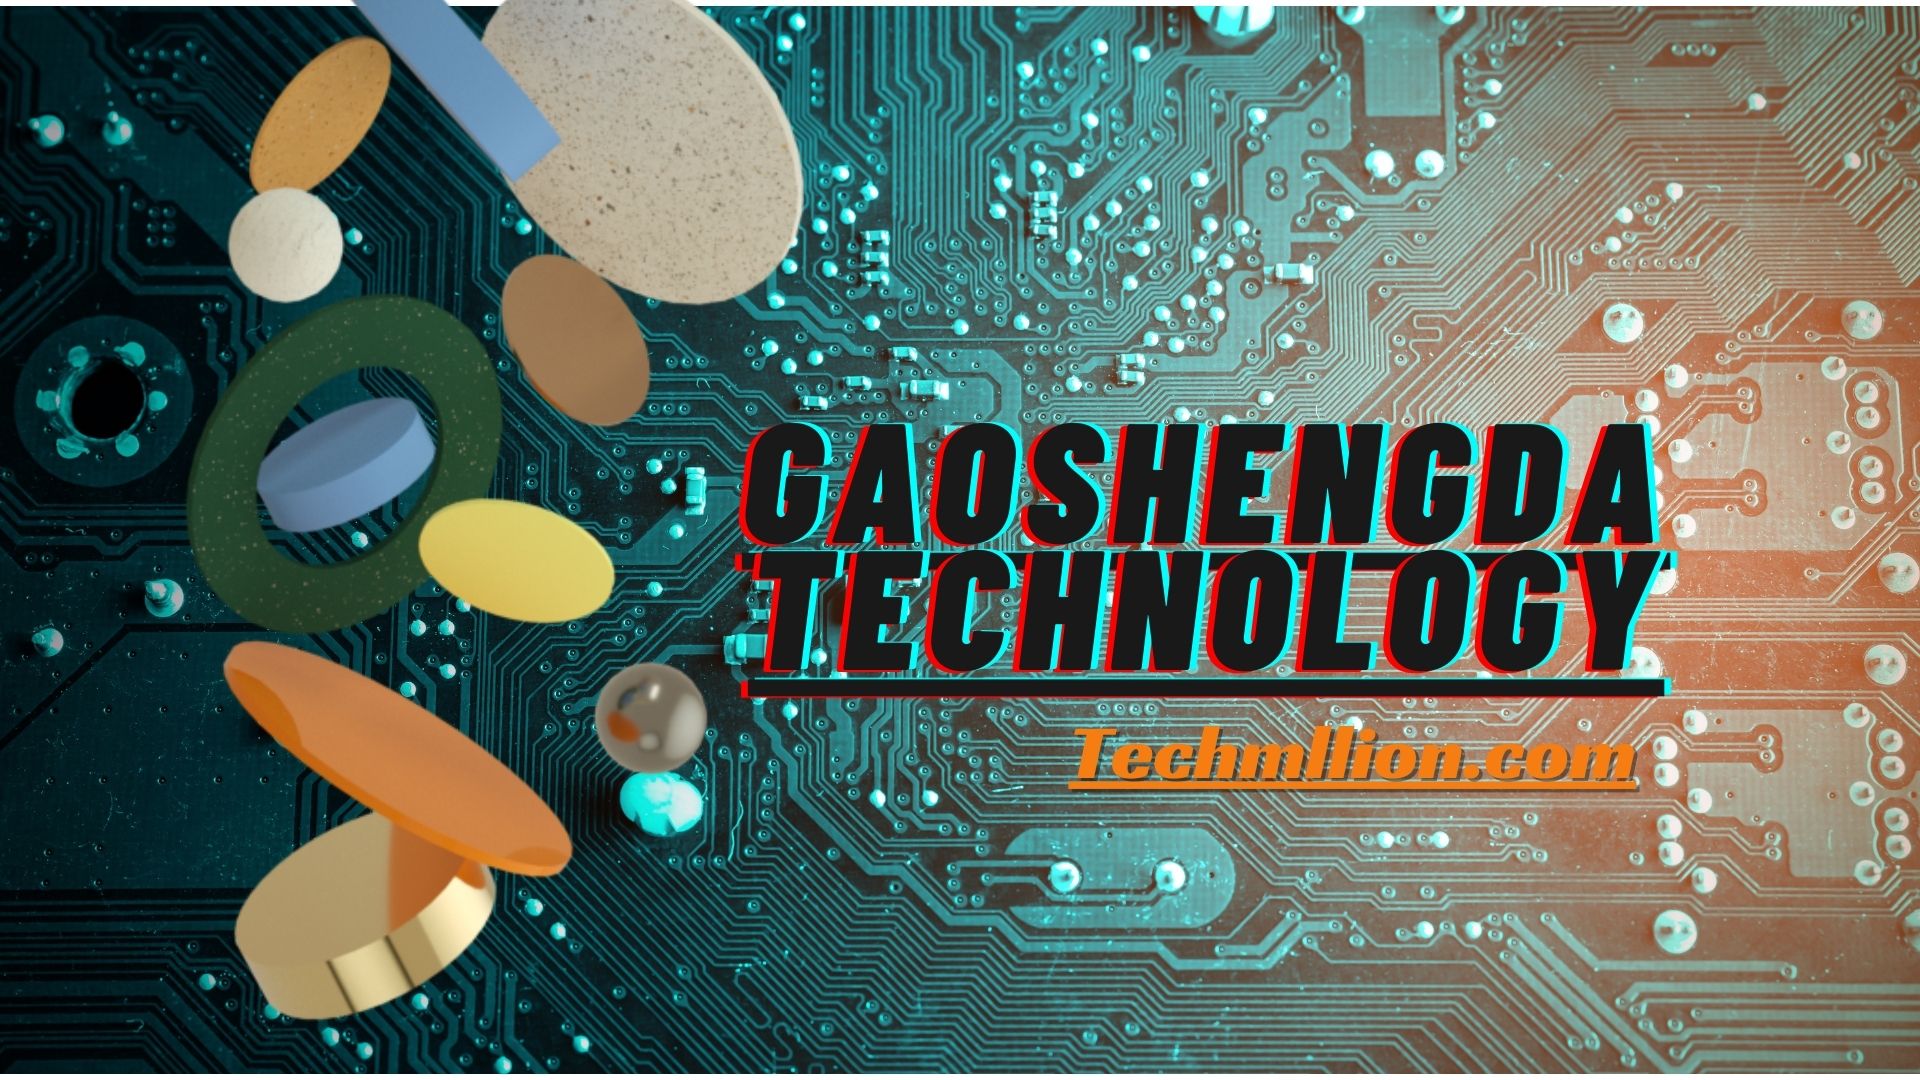 “What Sets Gaoshengda Technology Apart in the Tech Industry?”